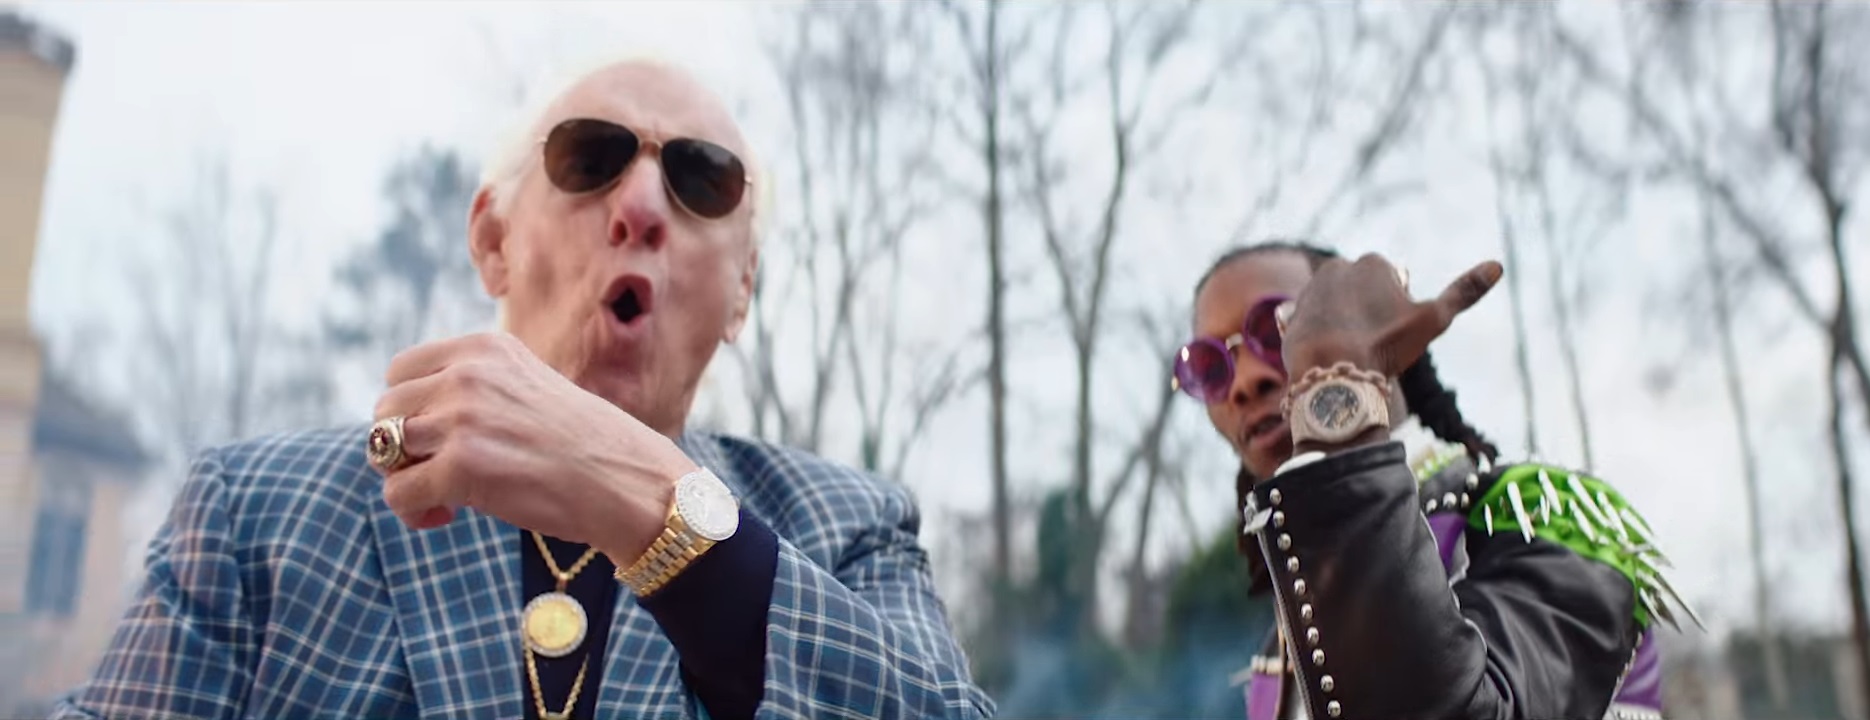 Offset’s “Ric Flair Drip” Video: The Most Iconic Moments